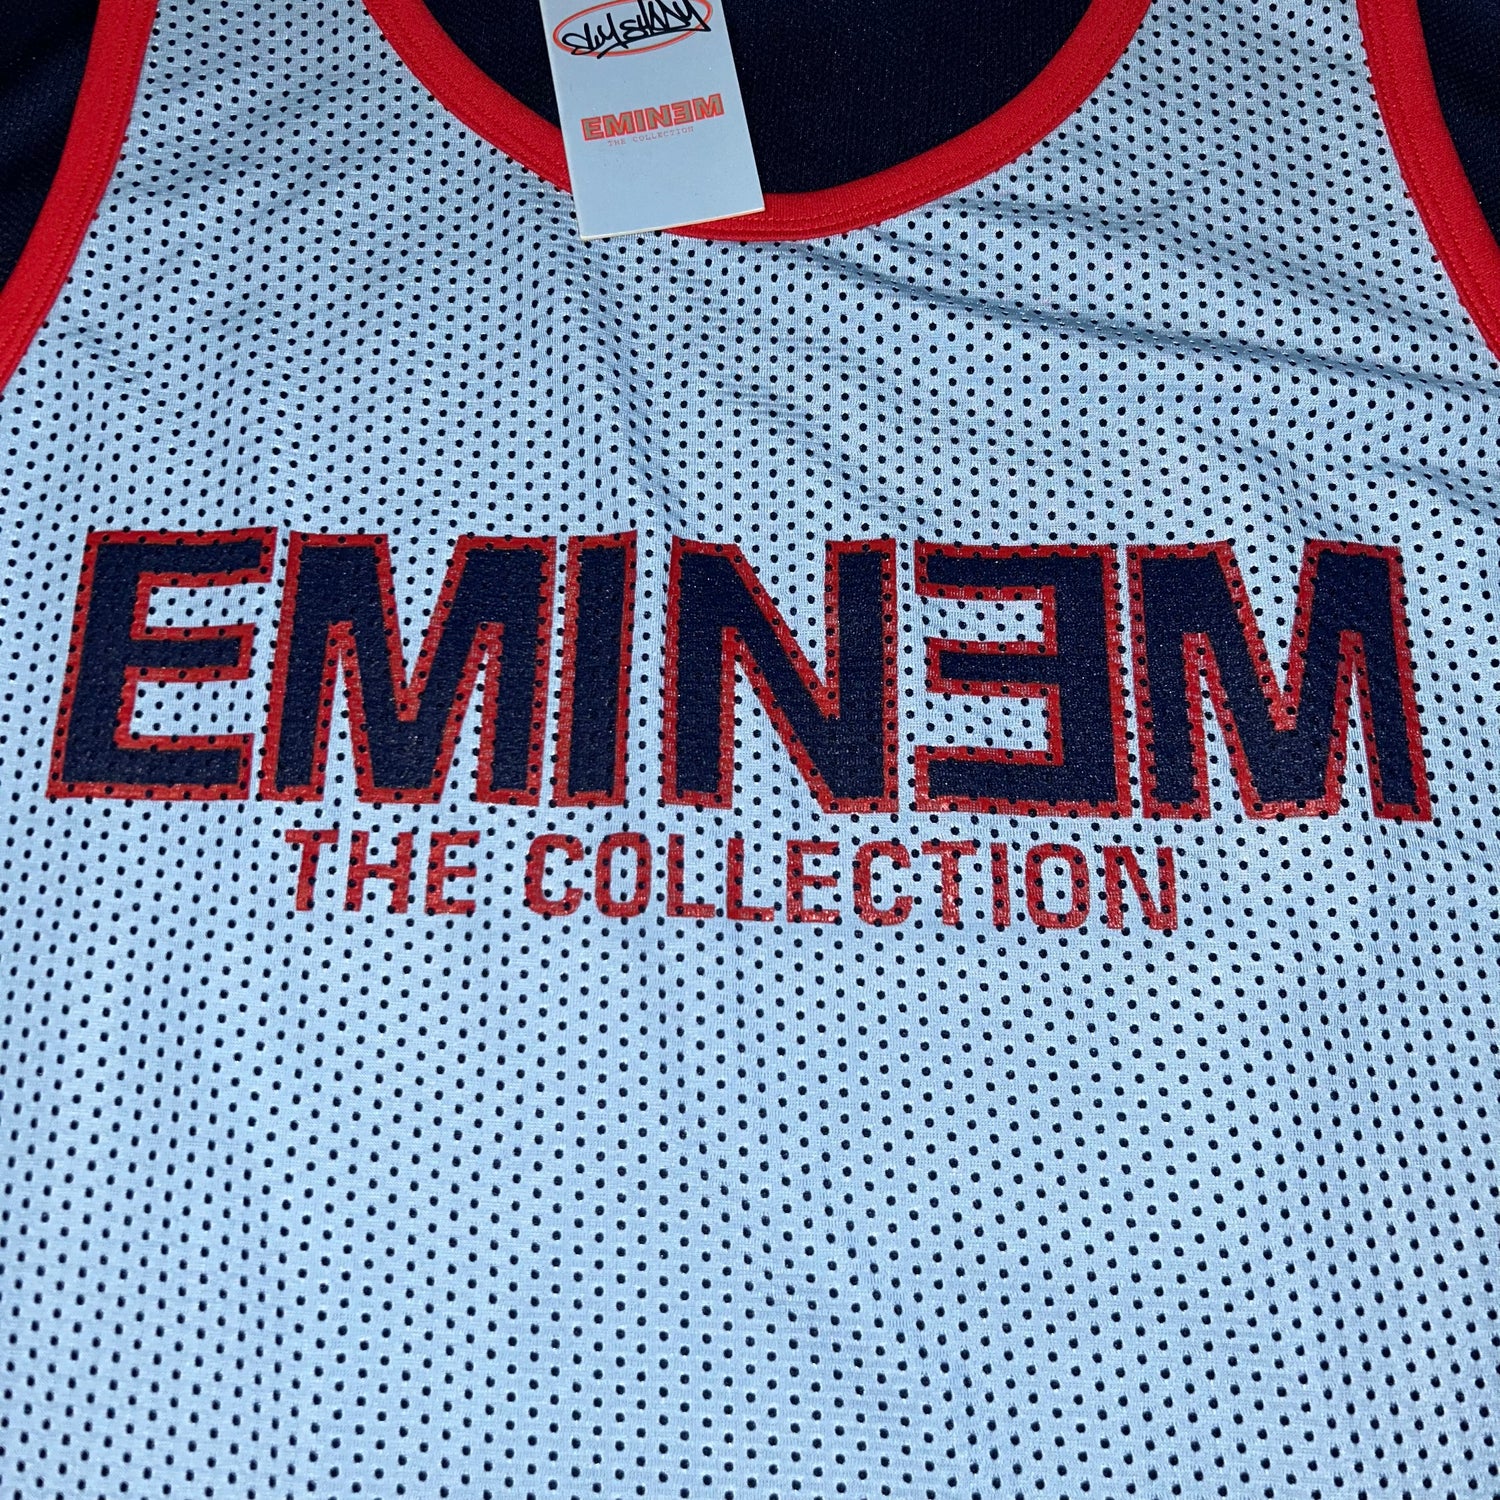 Jersey Slim Shady Eminem The Collection Vintage - oldstyleclothing